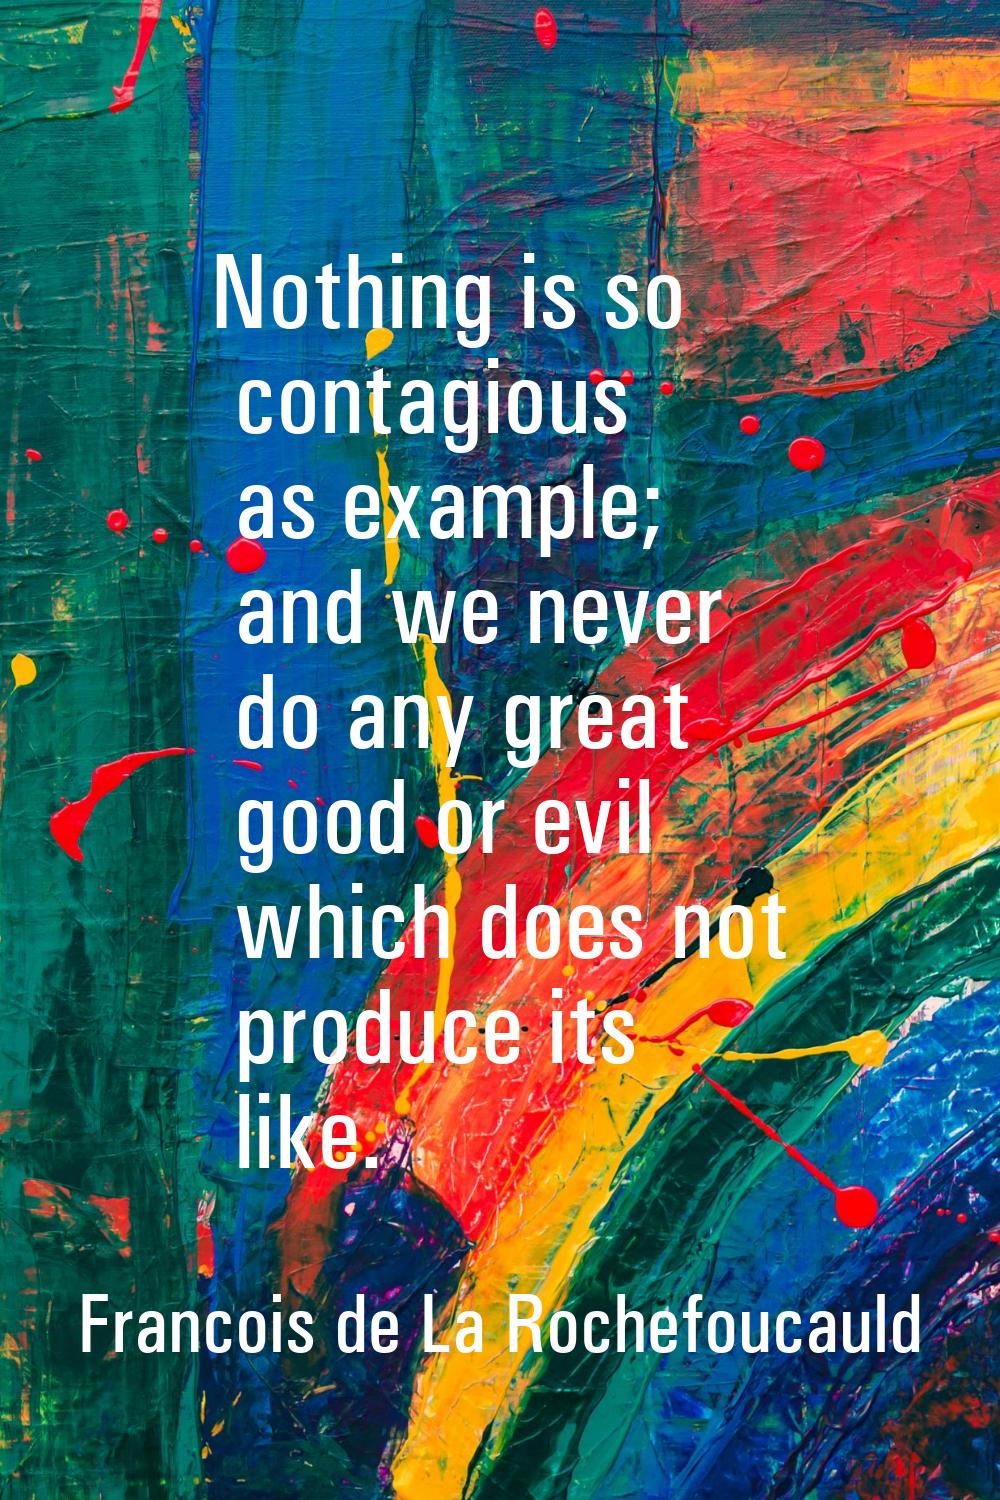 Nothing is so contagious as example; and we never do any great good or evil which does not produce 